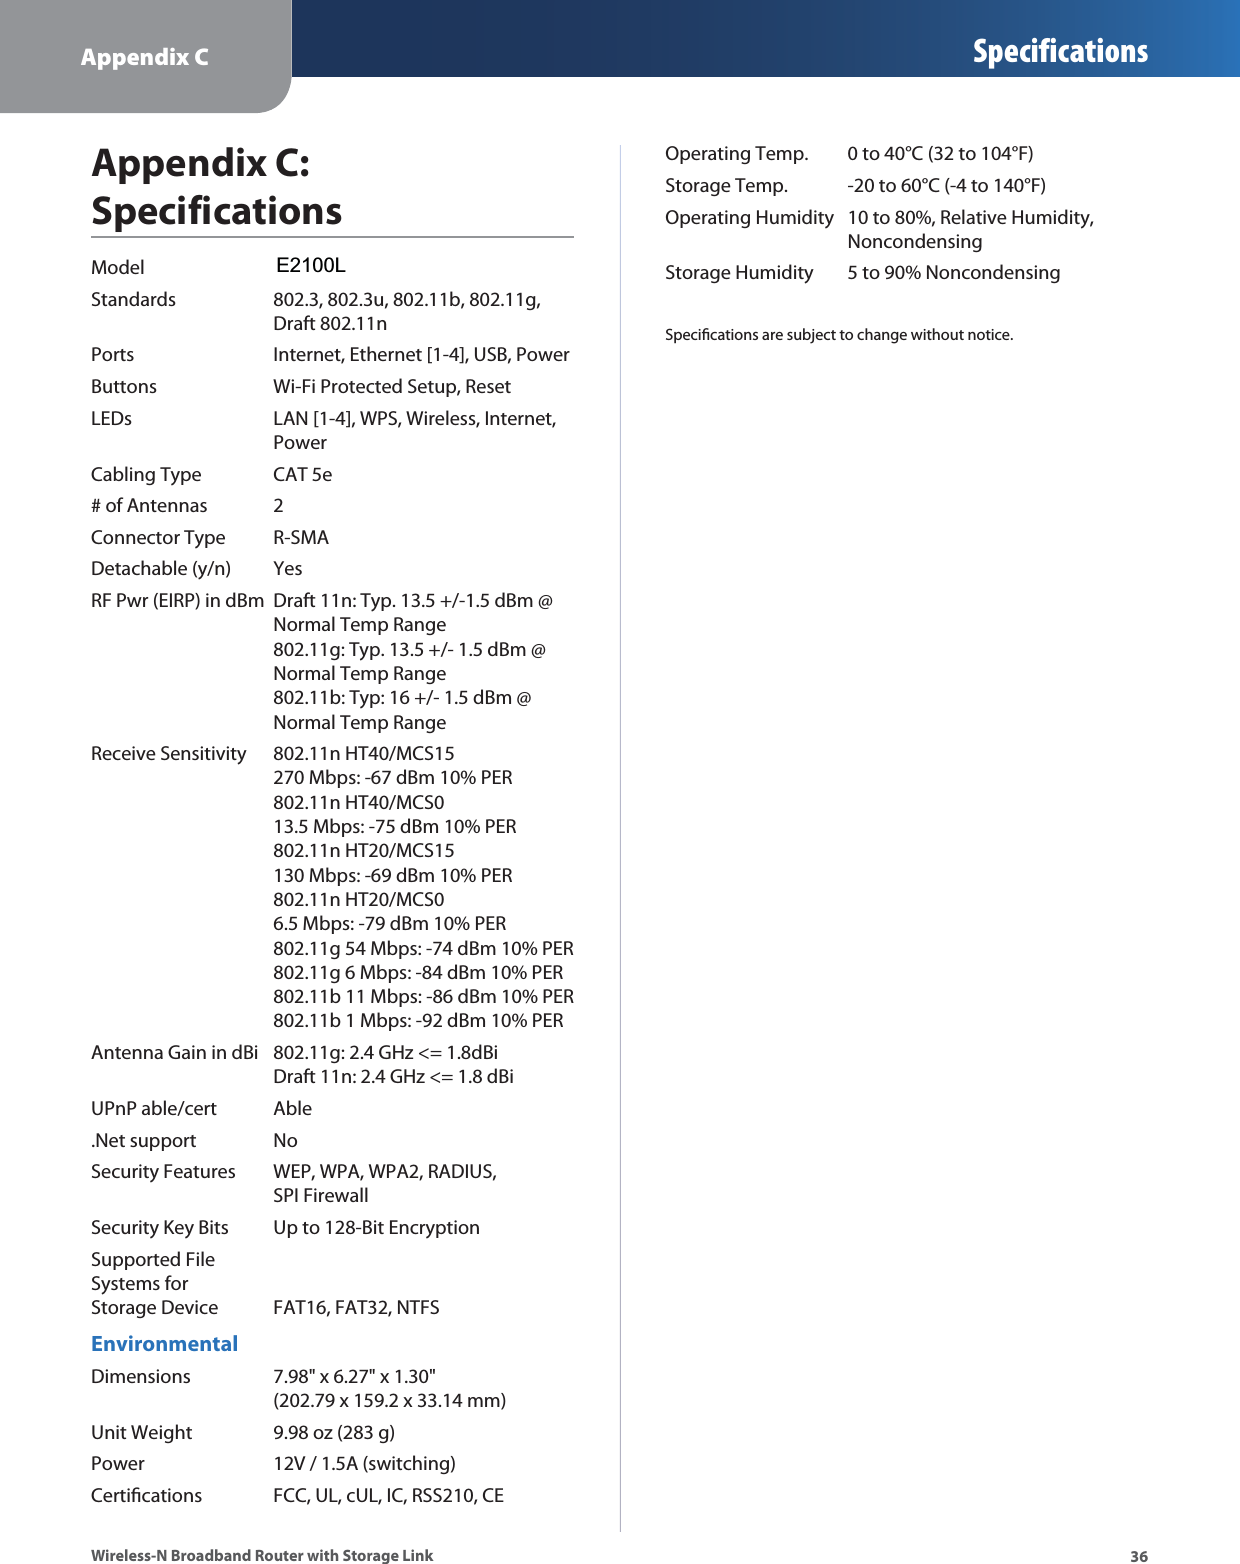 Appendix C Specifications36Wireless-N Broadband Router with Storage LinkAppendix C: SpecificationsModel WRT160NLStandards  802.3, 802.3u, 802.11b, 802.11g,  Draft 802.11nPorts  Internet, Ethernet [1-4], USB, PowerButtons  Wi-Fi Protected Setup, ResetLEDs  LAN [1-4], WPS, Wireless, Internet,  PowerCabling Type  CAT 5e# of Antennas  2Connector Type  R-SMADetachable (y/n)  YesRF Pwr (EIRP) in dBm  Draft 11n: Typ. 13.5 +/-1.5 dBm @ Normal Temp Range 802.11g: Typ. 13.5 +/- 1.5 dBm @  Normal Temp Range 802.11b: Typ: 16 +/- 1.5 dBm @  Normal Temp RangeReceive Sensitivity  802.11n HT40/MCS15  270 Mbps: -67 dBm 10% PER 802.11n HT40/MCS0  13.5 Mbps: -75 dBm 10% PER 802.11n HT20/MCS15  130 Mbps: -69 dBm 10% PER 802.11n HT20/MCS0  6.5 Mbps: -79 dBm 10% PER 802.11g 54 Mbps: -74 dBm 10% PER 802.11g 6 Mbps: -84 dBm 10% PER 802.11b 11 Mbps: -86 dBm 10% PER 802.11b 1 Mbps: -92 dBm 10% PERAntenna Gain in dBi  802.11g: 2.4 GHz &lt;= 1.8dBi Draft 11n: 2.4 GHz &lt;= 1.8 dBiUPnP able/cert  Able.Net support  NoSecurity Features  WEP, WPA, WPA2, RADIUS,  SPI FirewallSecurity Key Bits  Up to 128-Bit EncryptionSupported File  Systems for  Storage Device  FAT16, FAT32, NTFSEnvironmentalDimensions  7.98&quot; x 6.27&quot; x 1.30&quot; (202.79 x 159.2 x 33.14 mm)Unit Weight  9.98 oz (283 g)Power  12V / 1.5A (switching)Certications  FCC, UL, cUL, IC, RSS210, CEOperating Temp.  0 to 40°C (32 to 104°F)Storage Temp.  -20 to 60°C (-4 to 140°F)Operating Humidity  10 to 80%, Relative Humidity,   NoncondensingStorage Humidity  5 to 90% NoncondensingSpecications are subject to change without notice.E2100L